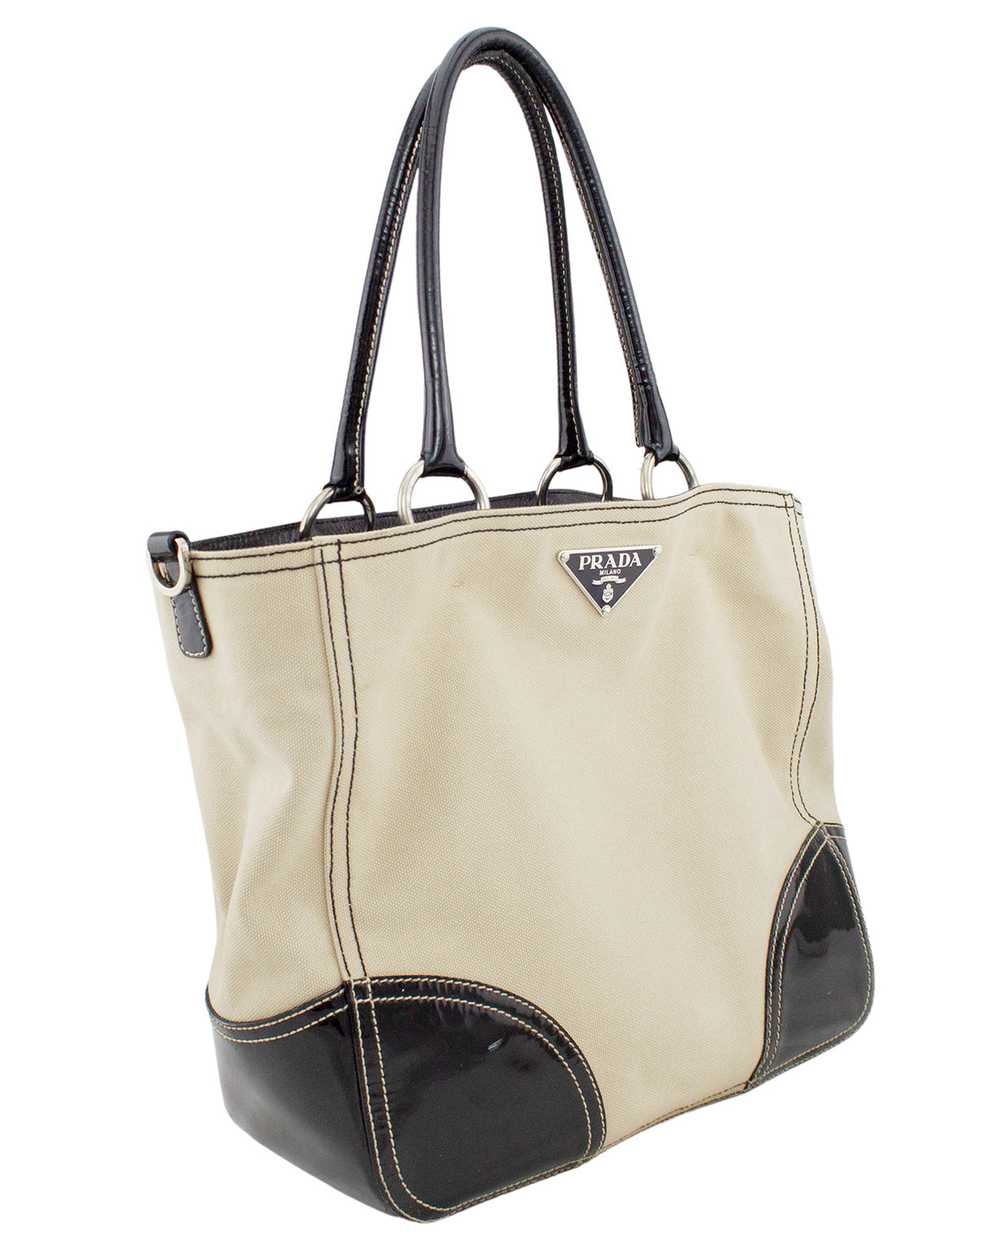 Prada Beige Canvas Tote with Black Patent Leather - image 2